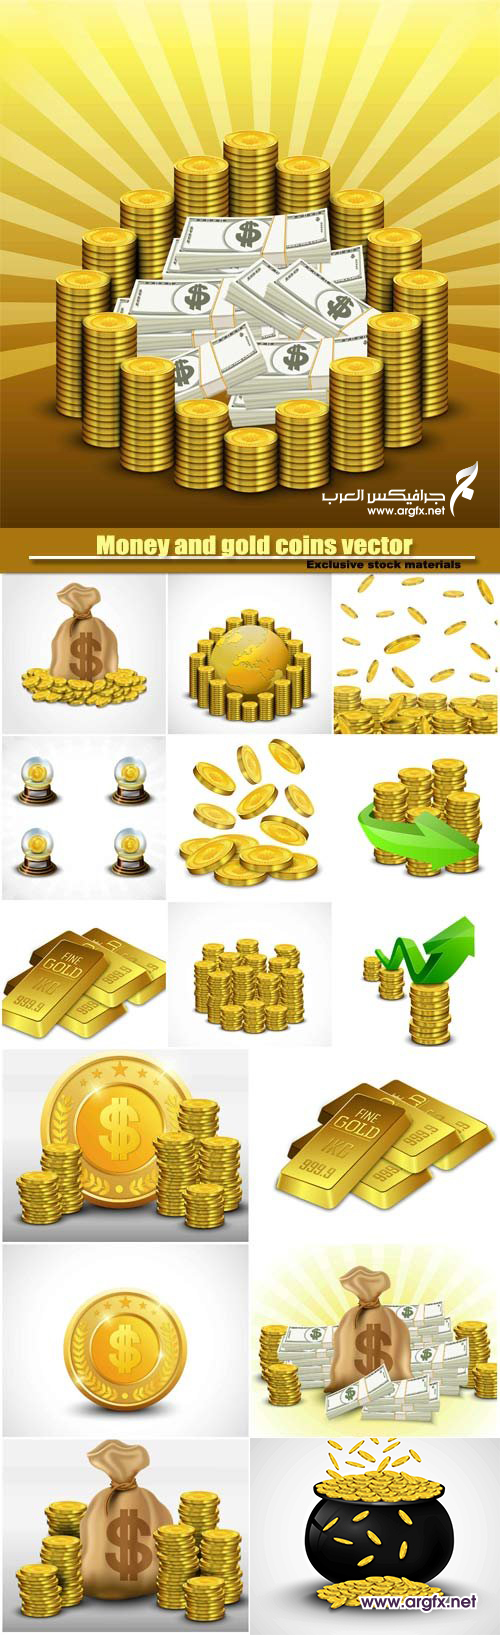  Money and gold coins vector